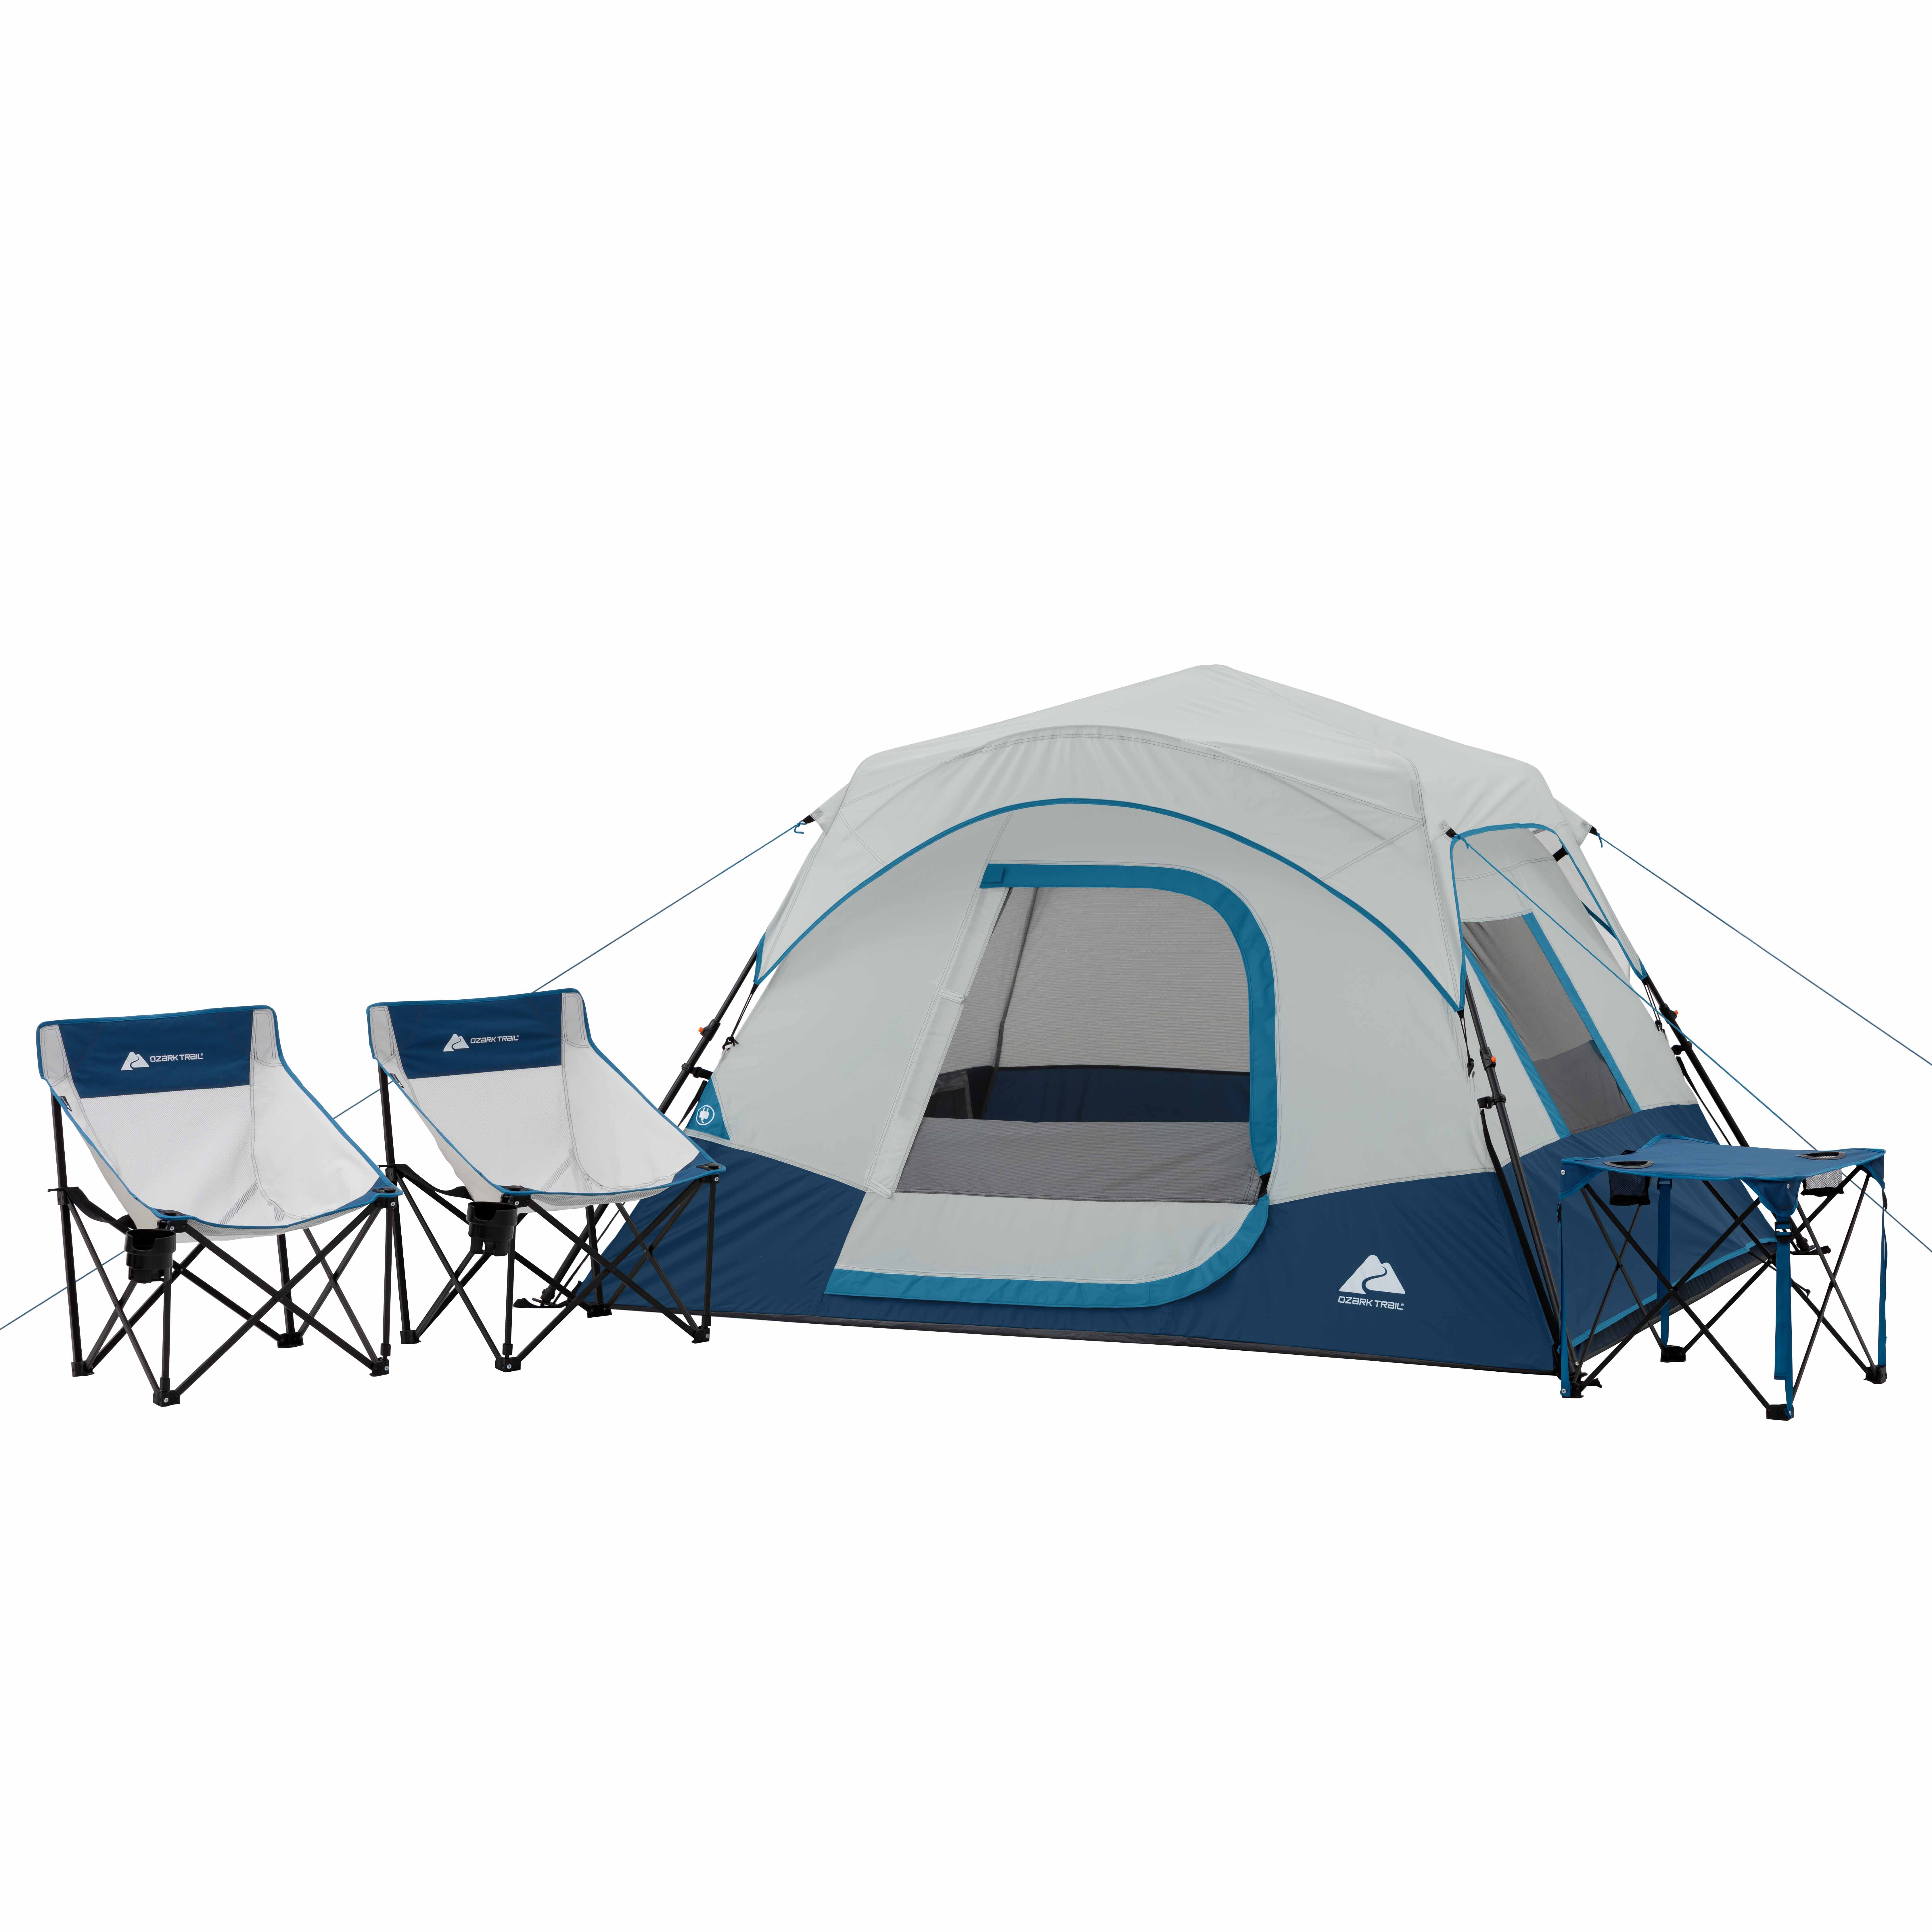 Ozark Trail 4 Piece, Tent, Chair and Table Camping Combo - image 1 of 15